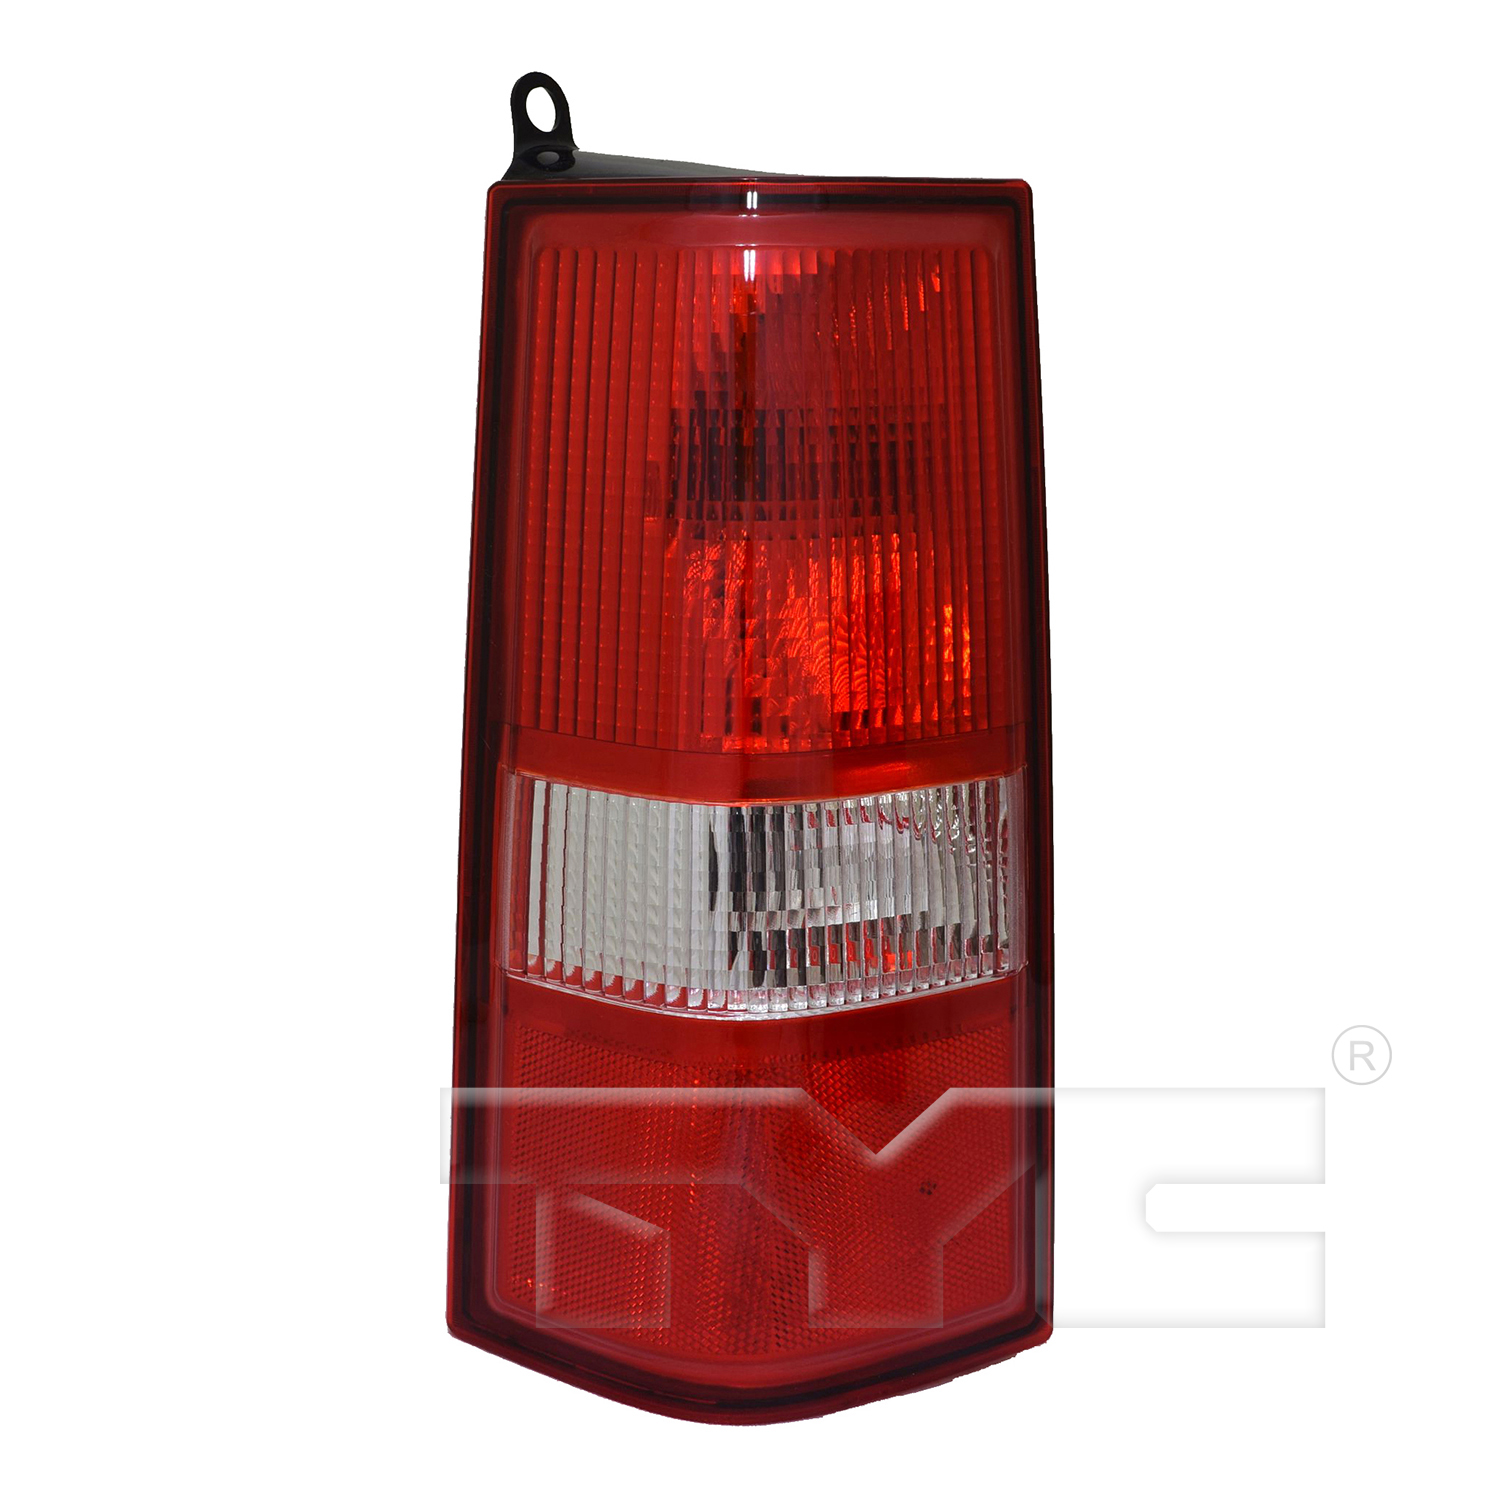 Aftermarket TAILLIGHTS for CHEVROLET - EXPRESS 2500, EXPRESS 2500,03-21,LT Taillamp assy